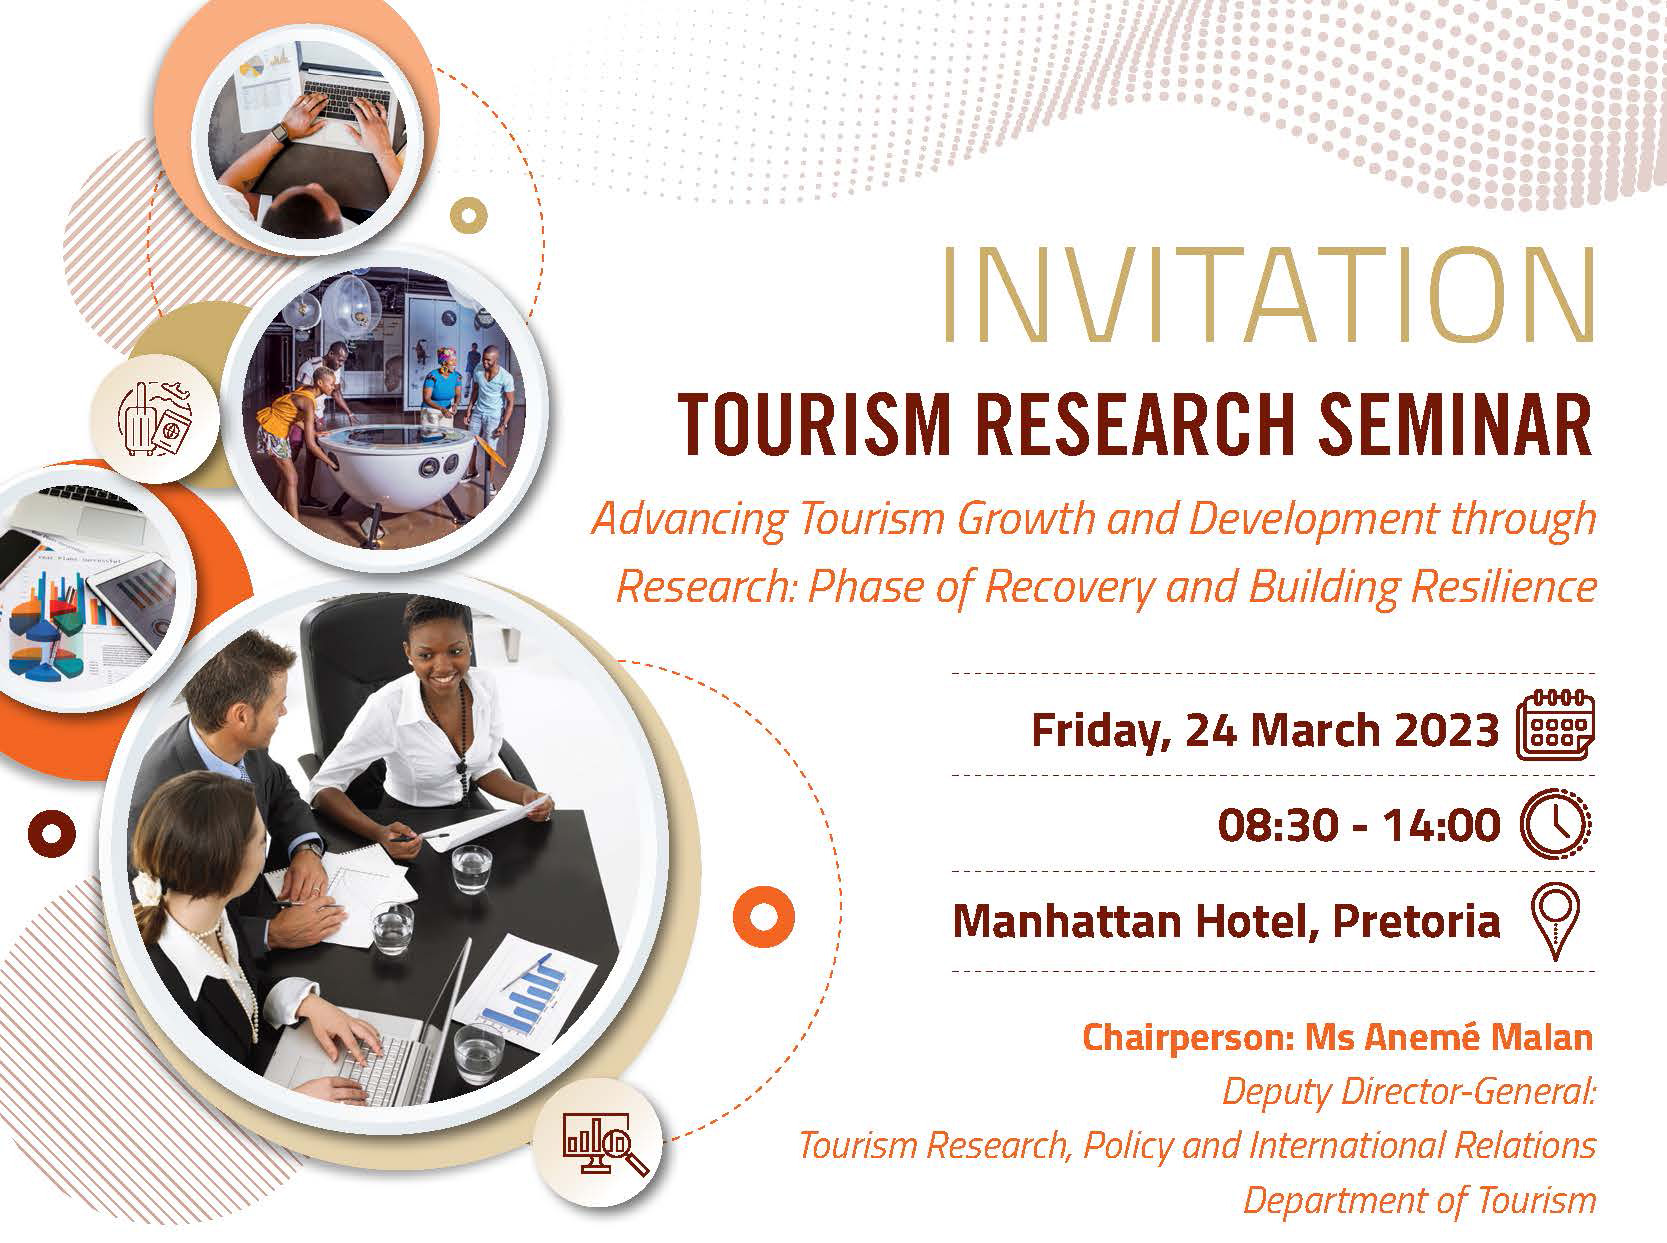 Advancing Tourism Growth and Development through research